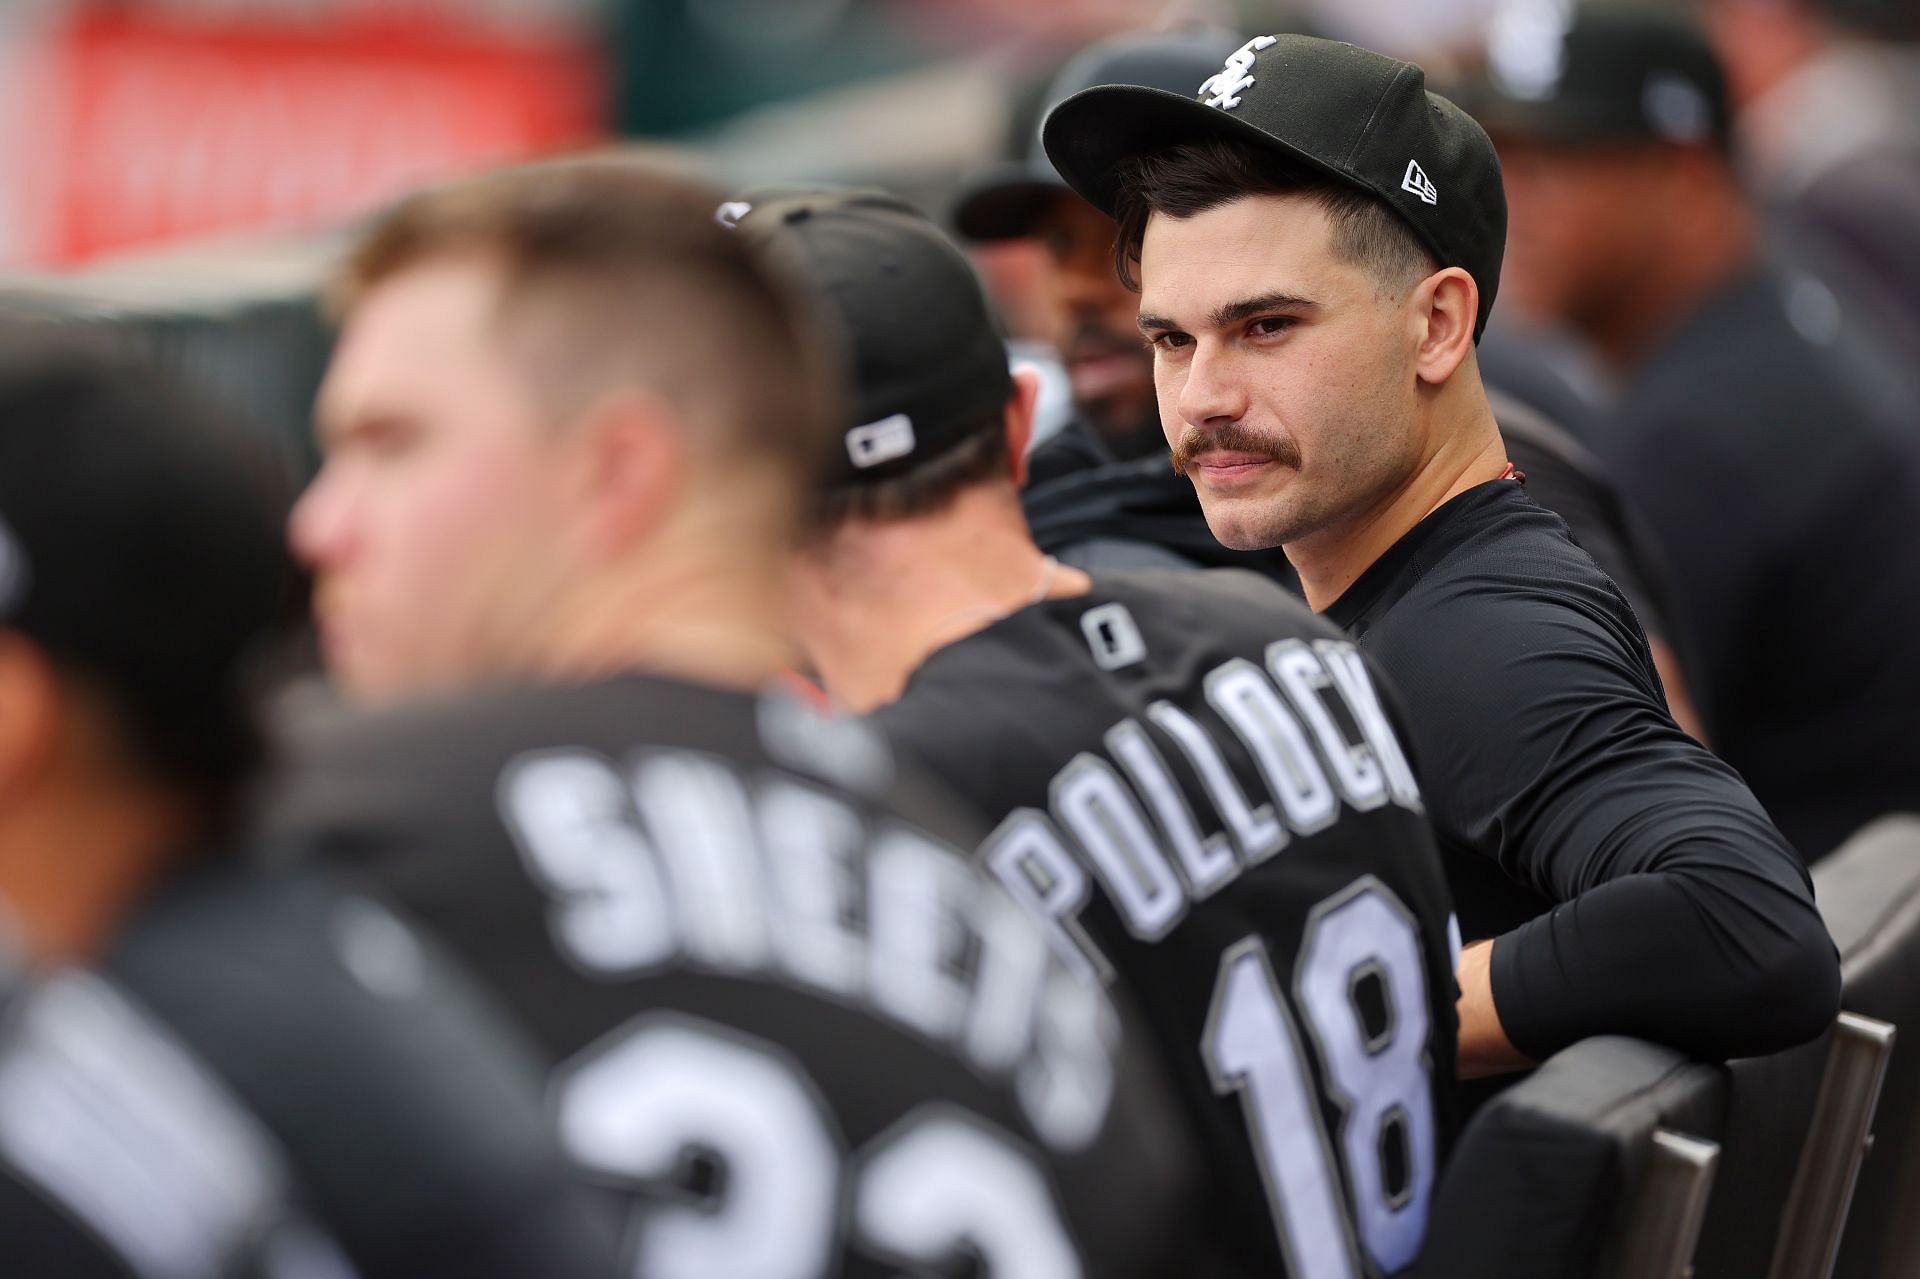 BC on X: Very few people know about the Chicago White Sox powder